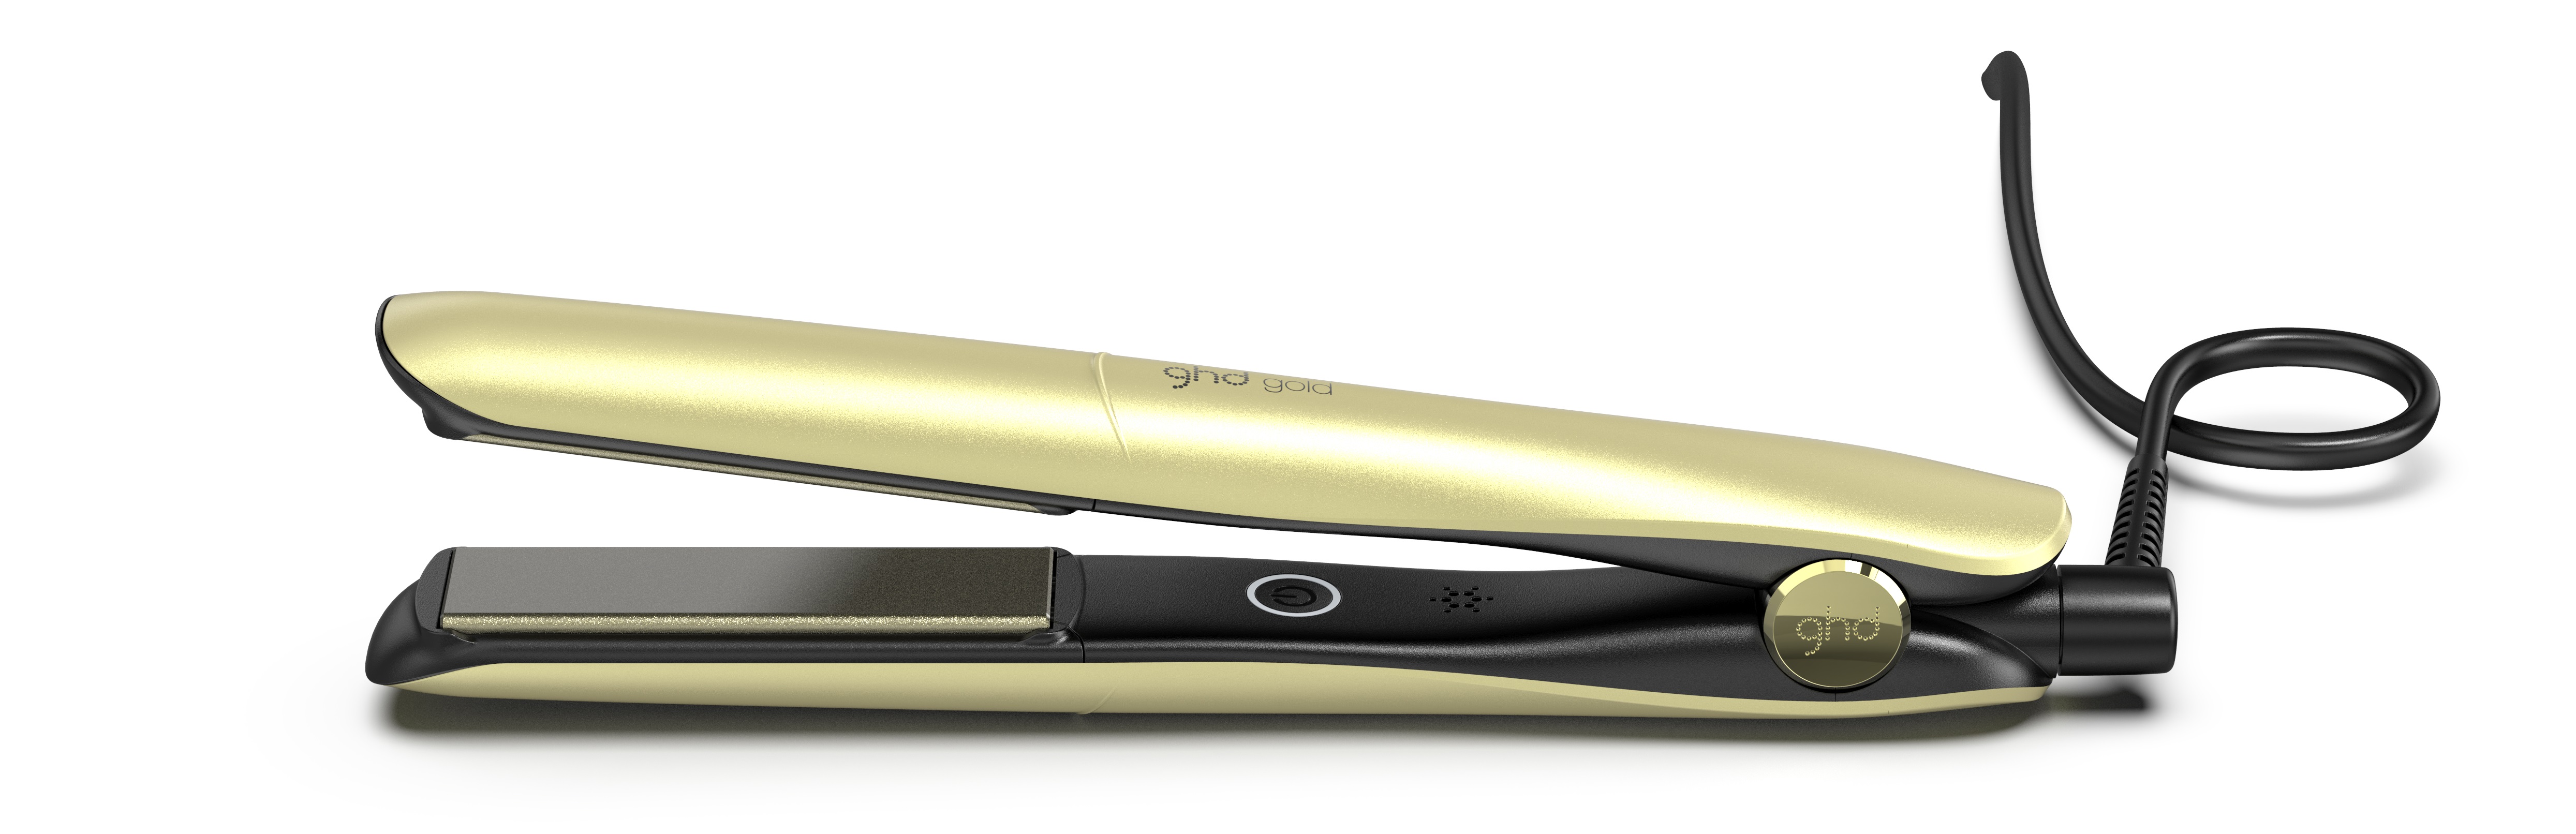 The limited edition ghd saharan pure gold styler.